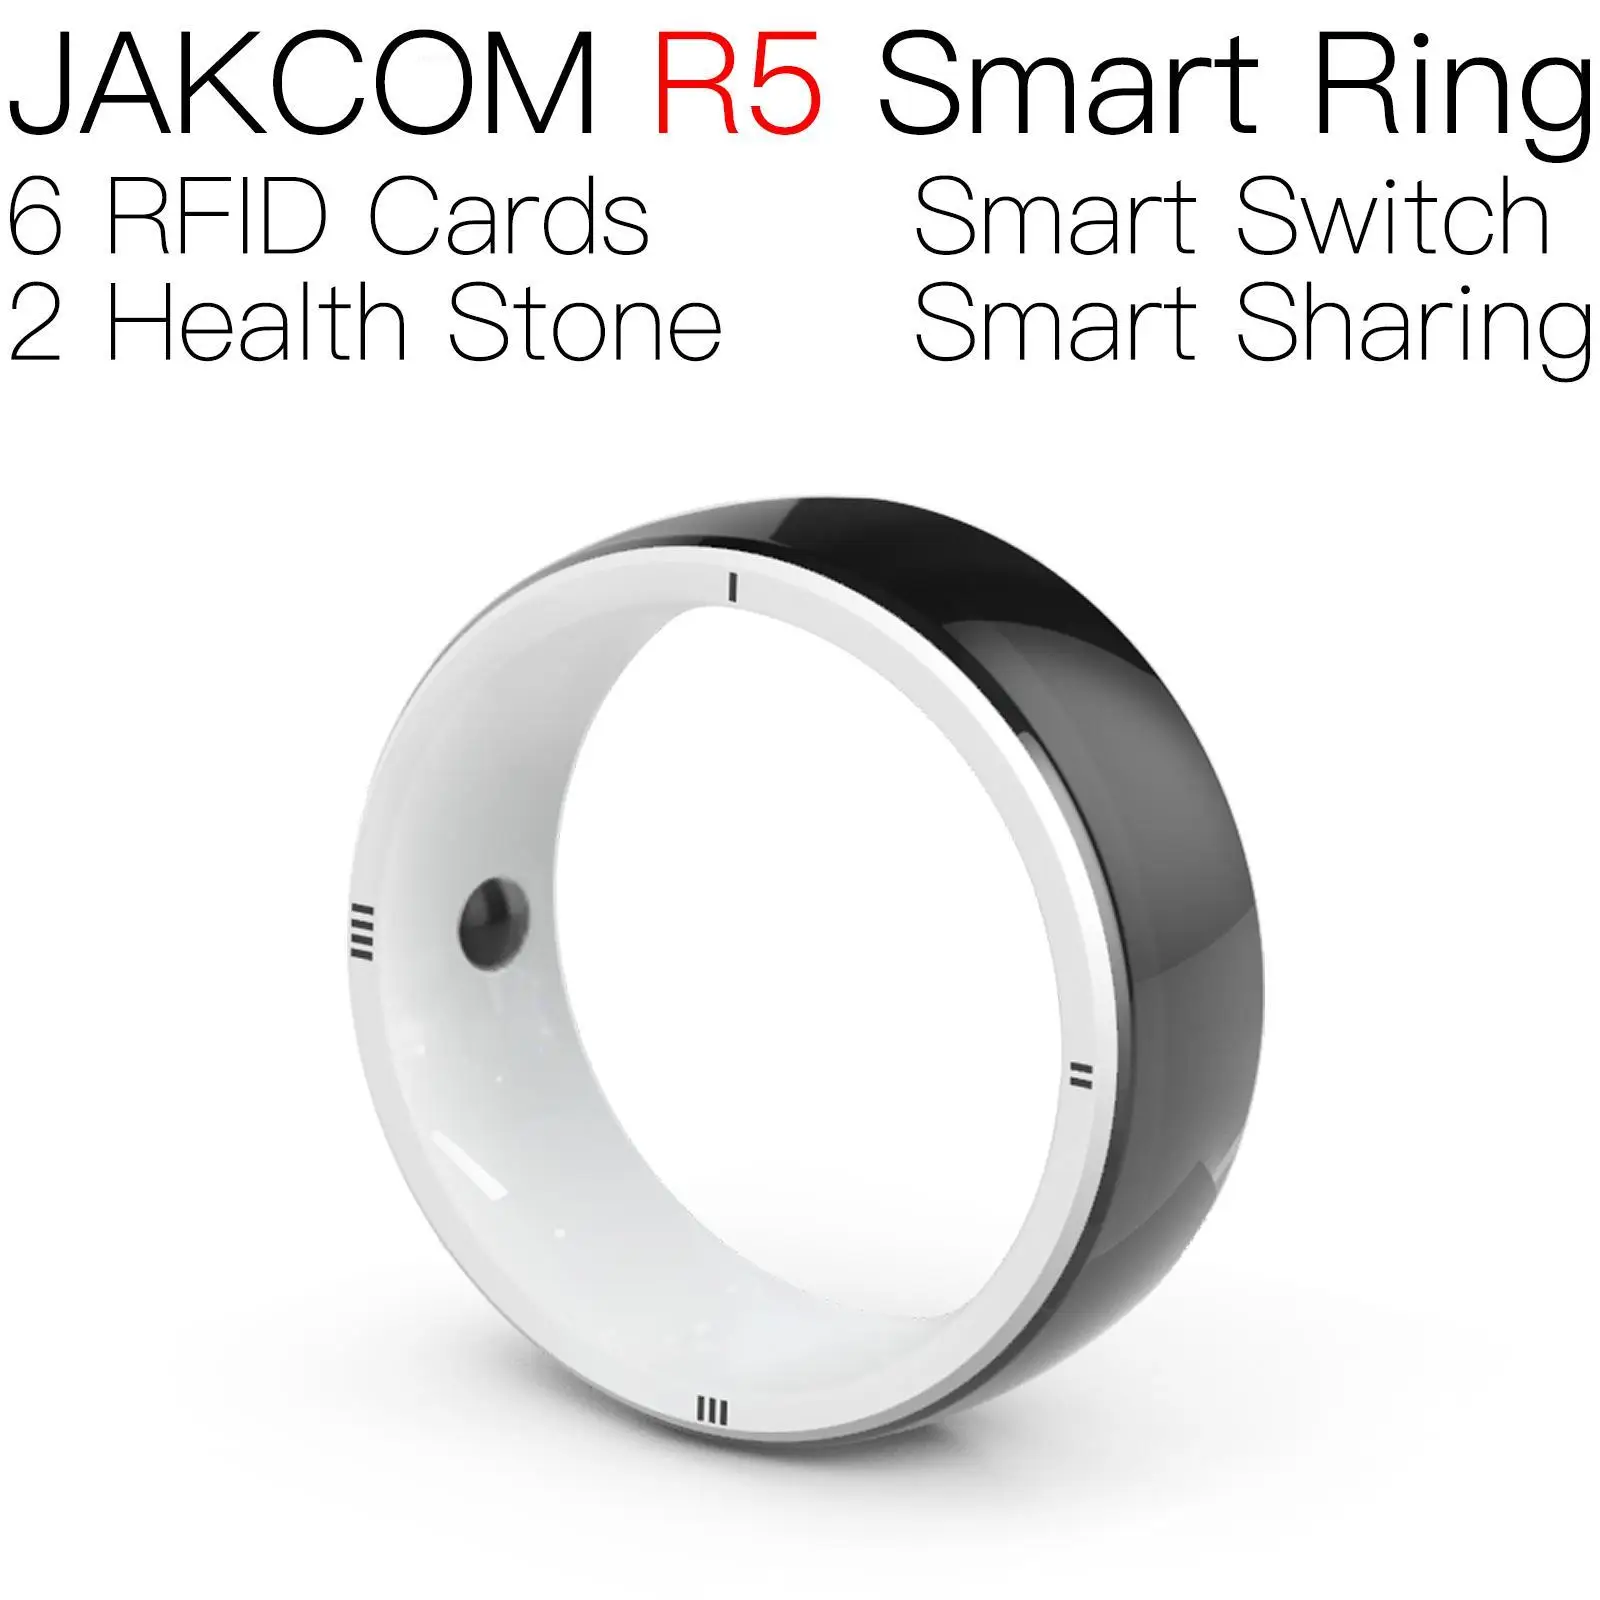 

JAKCOM R5 Smart Ring Newer than license office 365 programmable nfc card tag rugged uhf 860 isp adapter for rt809h ic id rfid